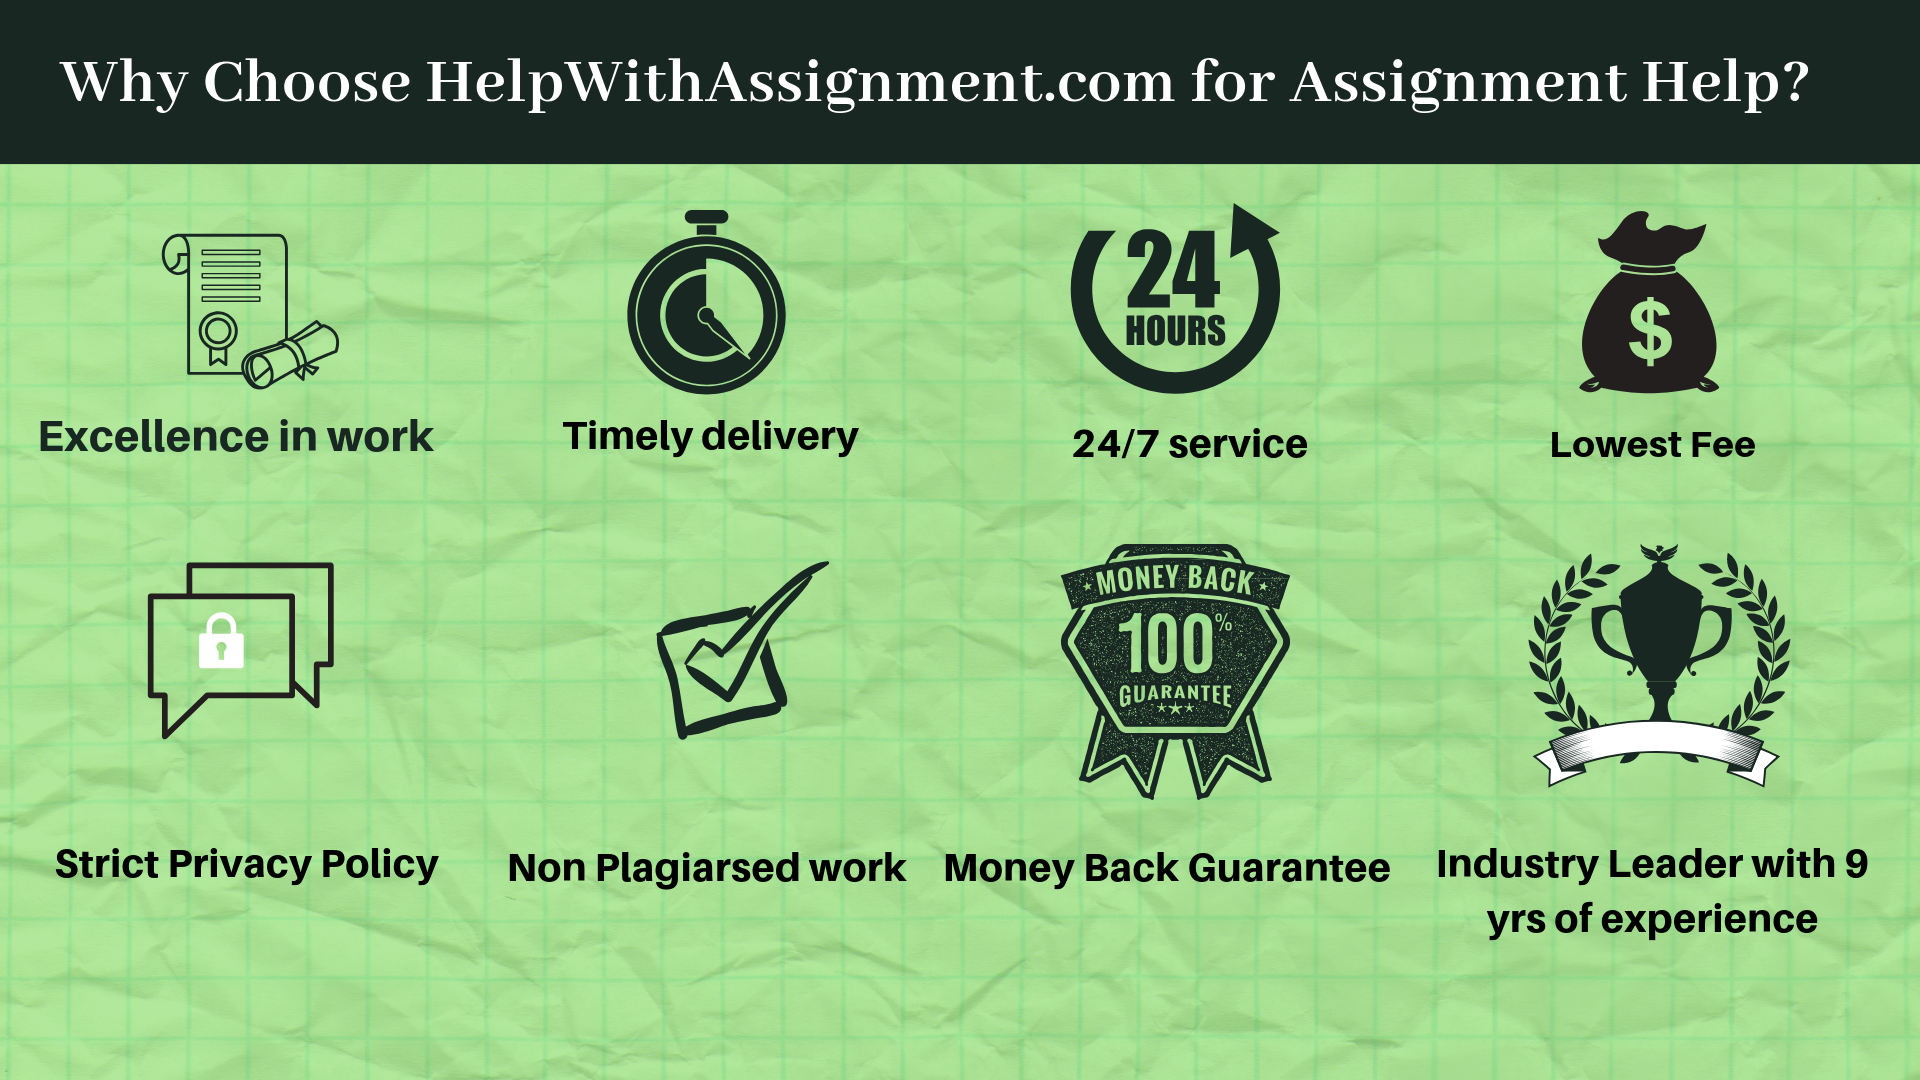 IT Security Assignment Help